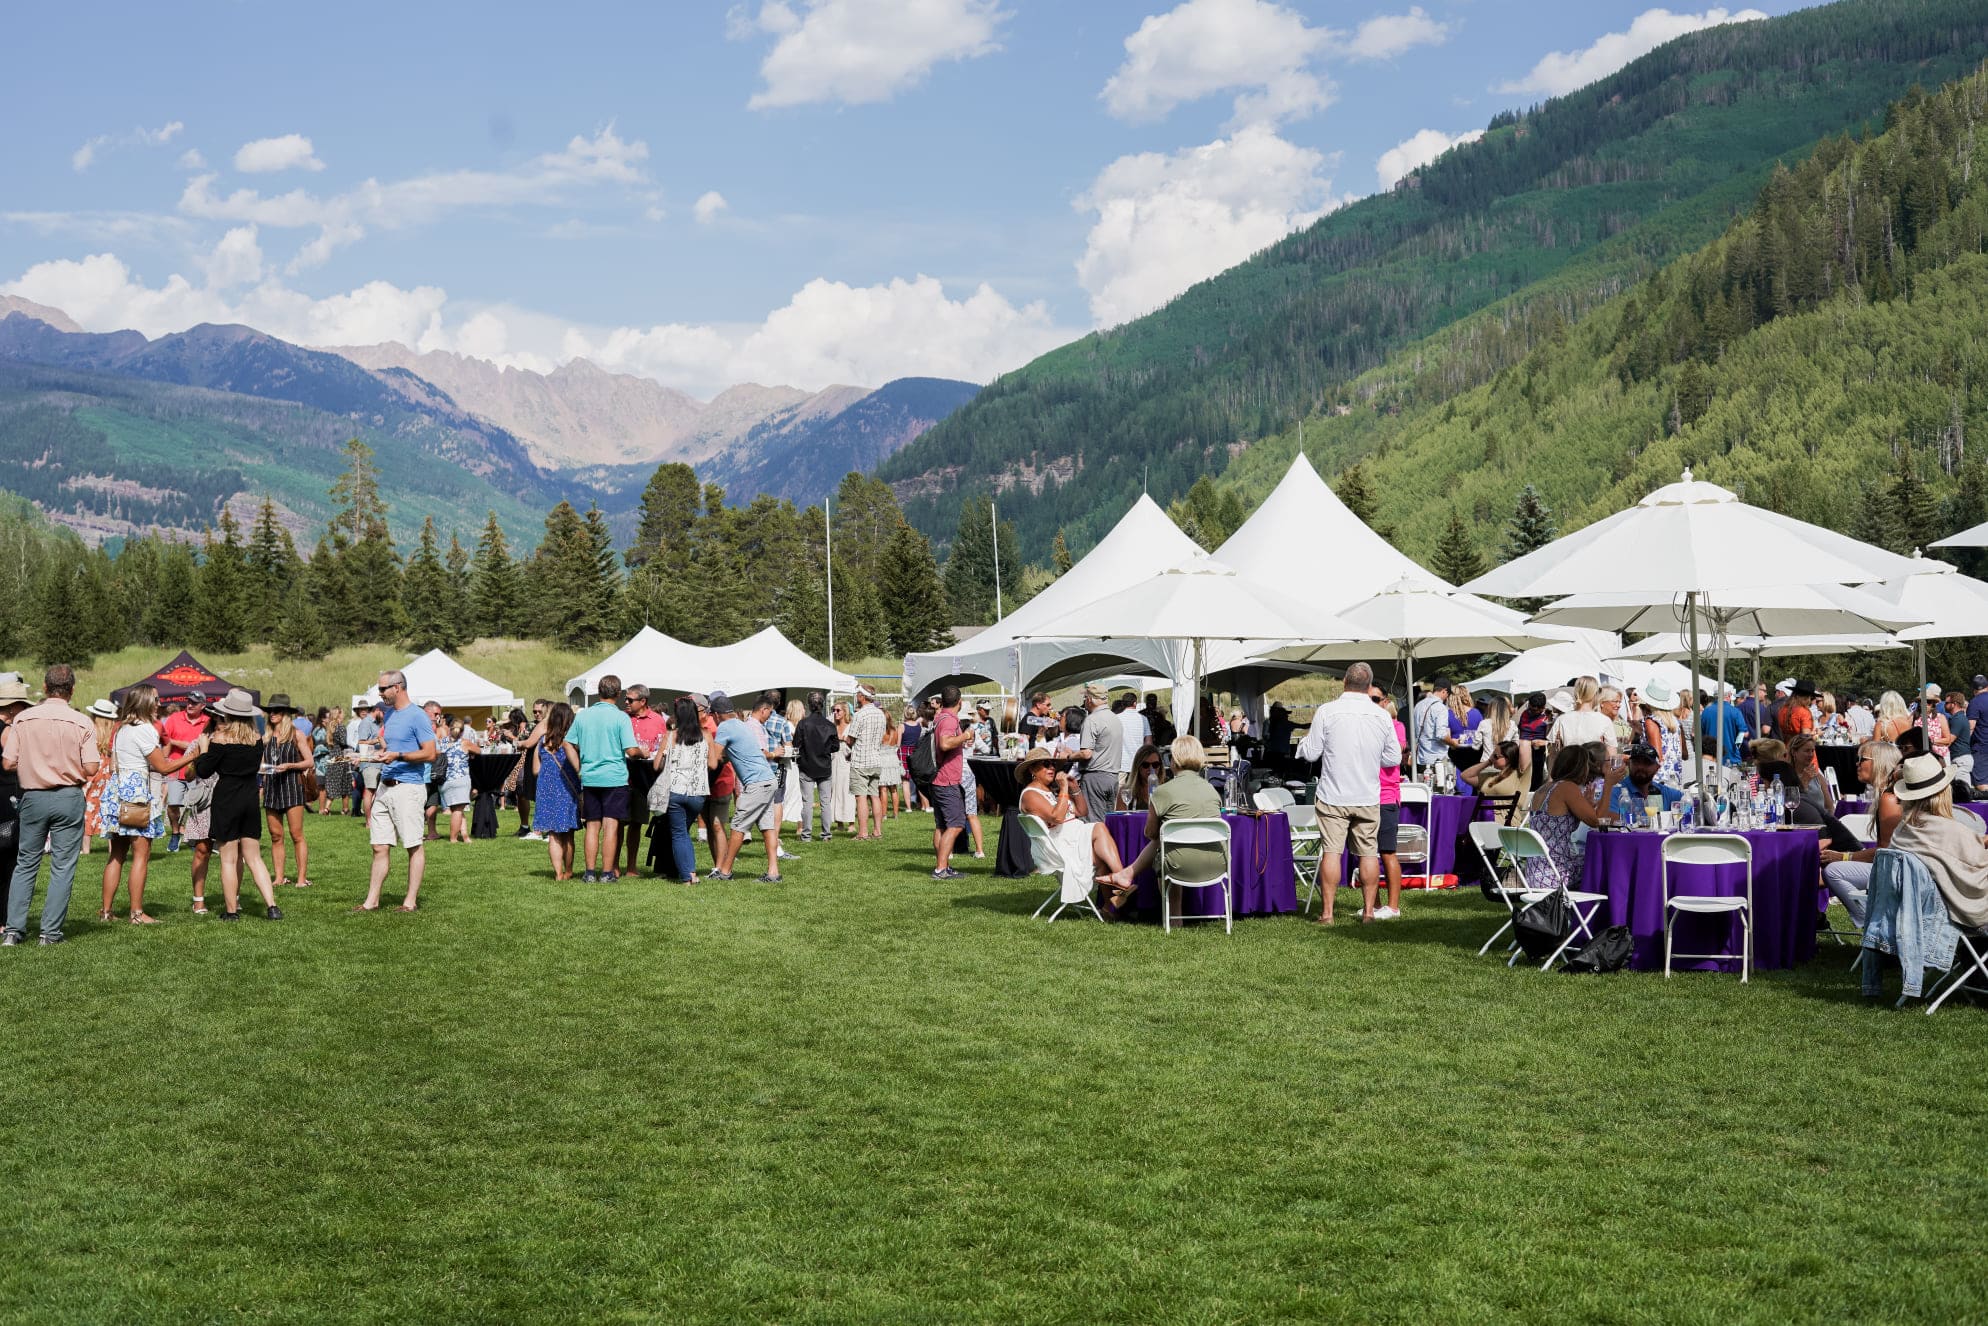 A crowd of people at a festival in a grassy field with mountains in the background.